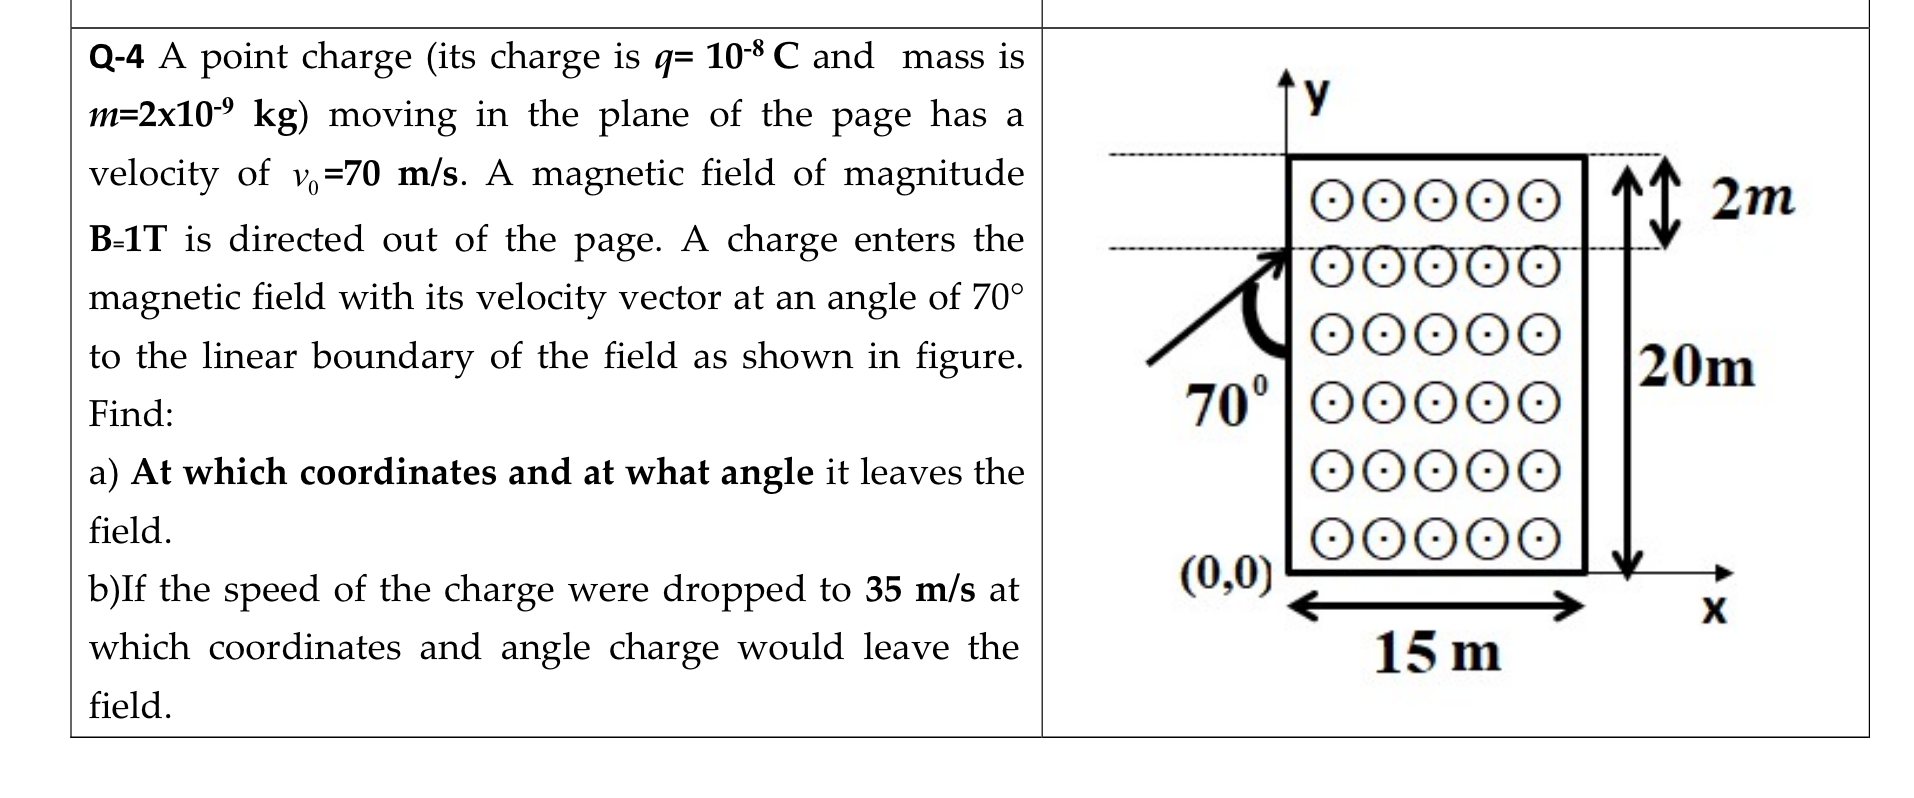 Q-4 A point charge (its charge is q= 10-8 C and mass is
m=2x109 kg) moving in the plane of the page has a
velocity of v=70 m/s. A magnetic field of magnitude
0000Ο
00000
2m
B-1T is directed out of the page. A charge enters the
magnetic field with its velocity vector at an angle of 70°
to the linear boundary of the field as shown in figure.
20m
70°|000
Find:
a) At which coordinates and at what angle it leaves the
field.
b)If the speed of the charge were dropped to 35 m/s at
(0,0)
X
which coordinates and angle charge would leave the
15 m
field.
